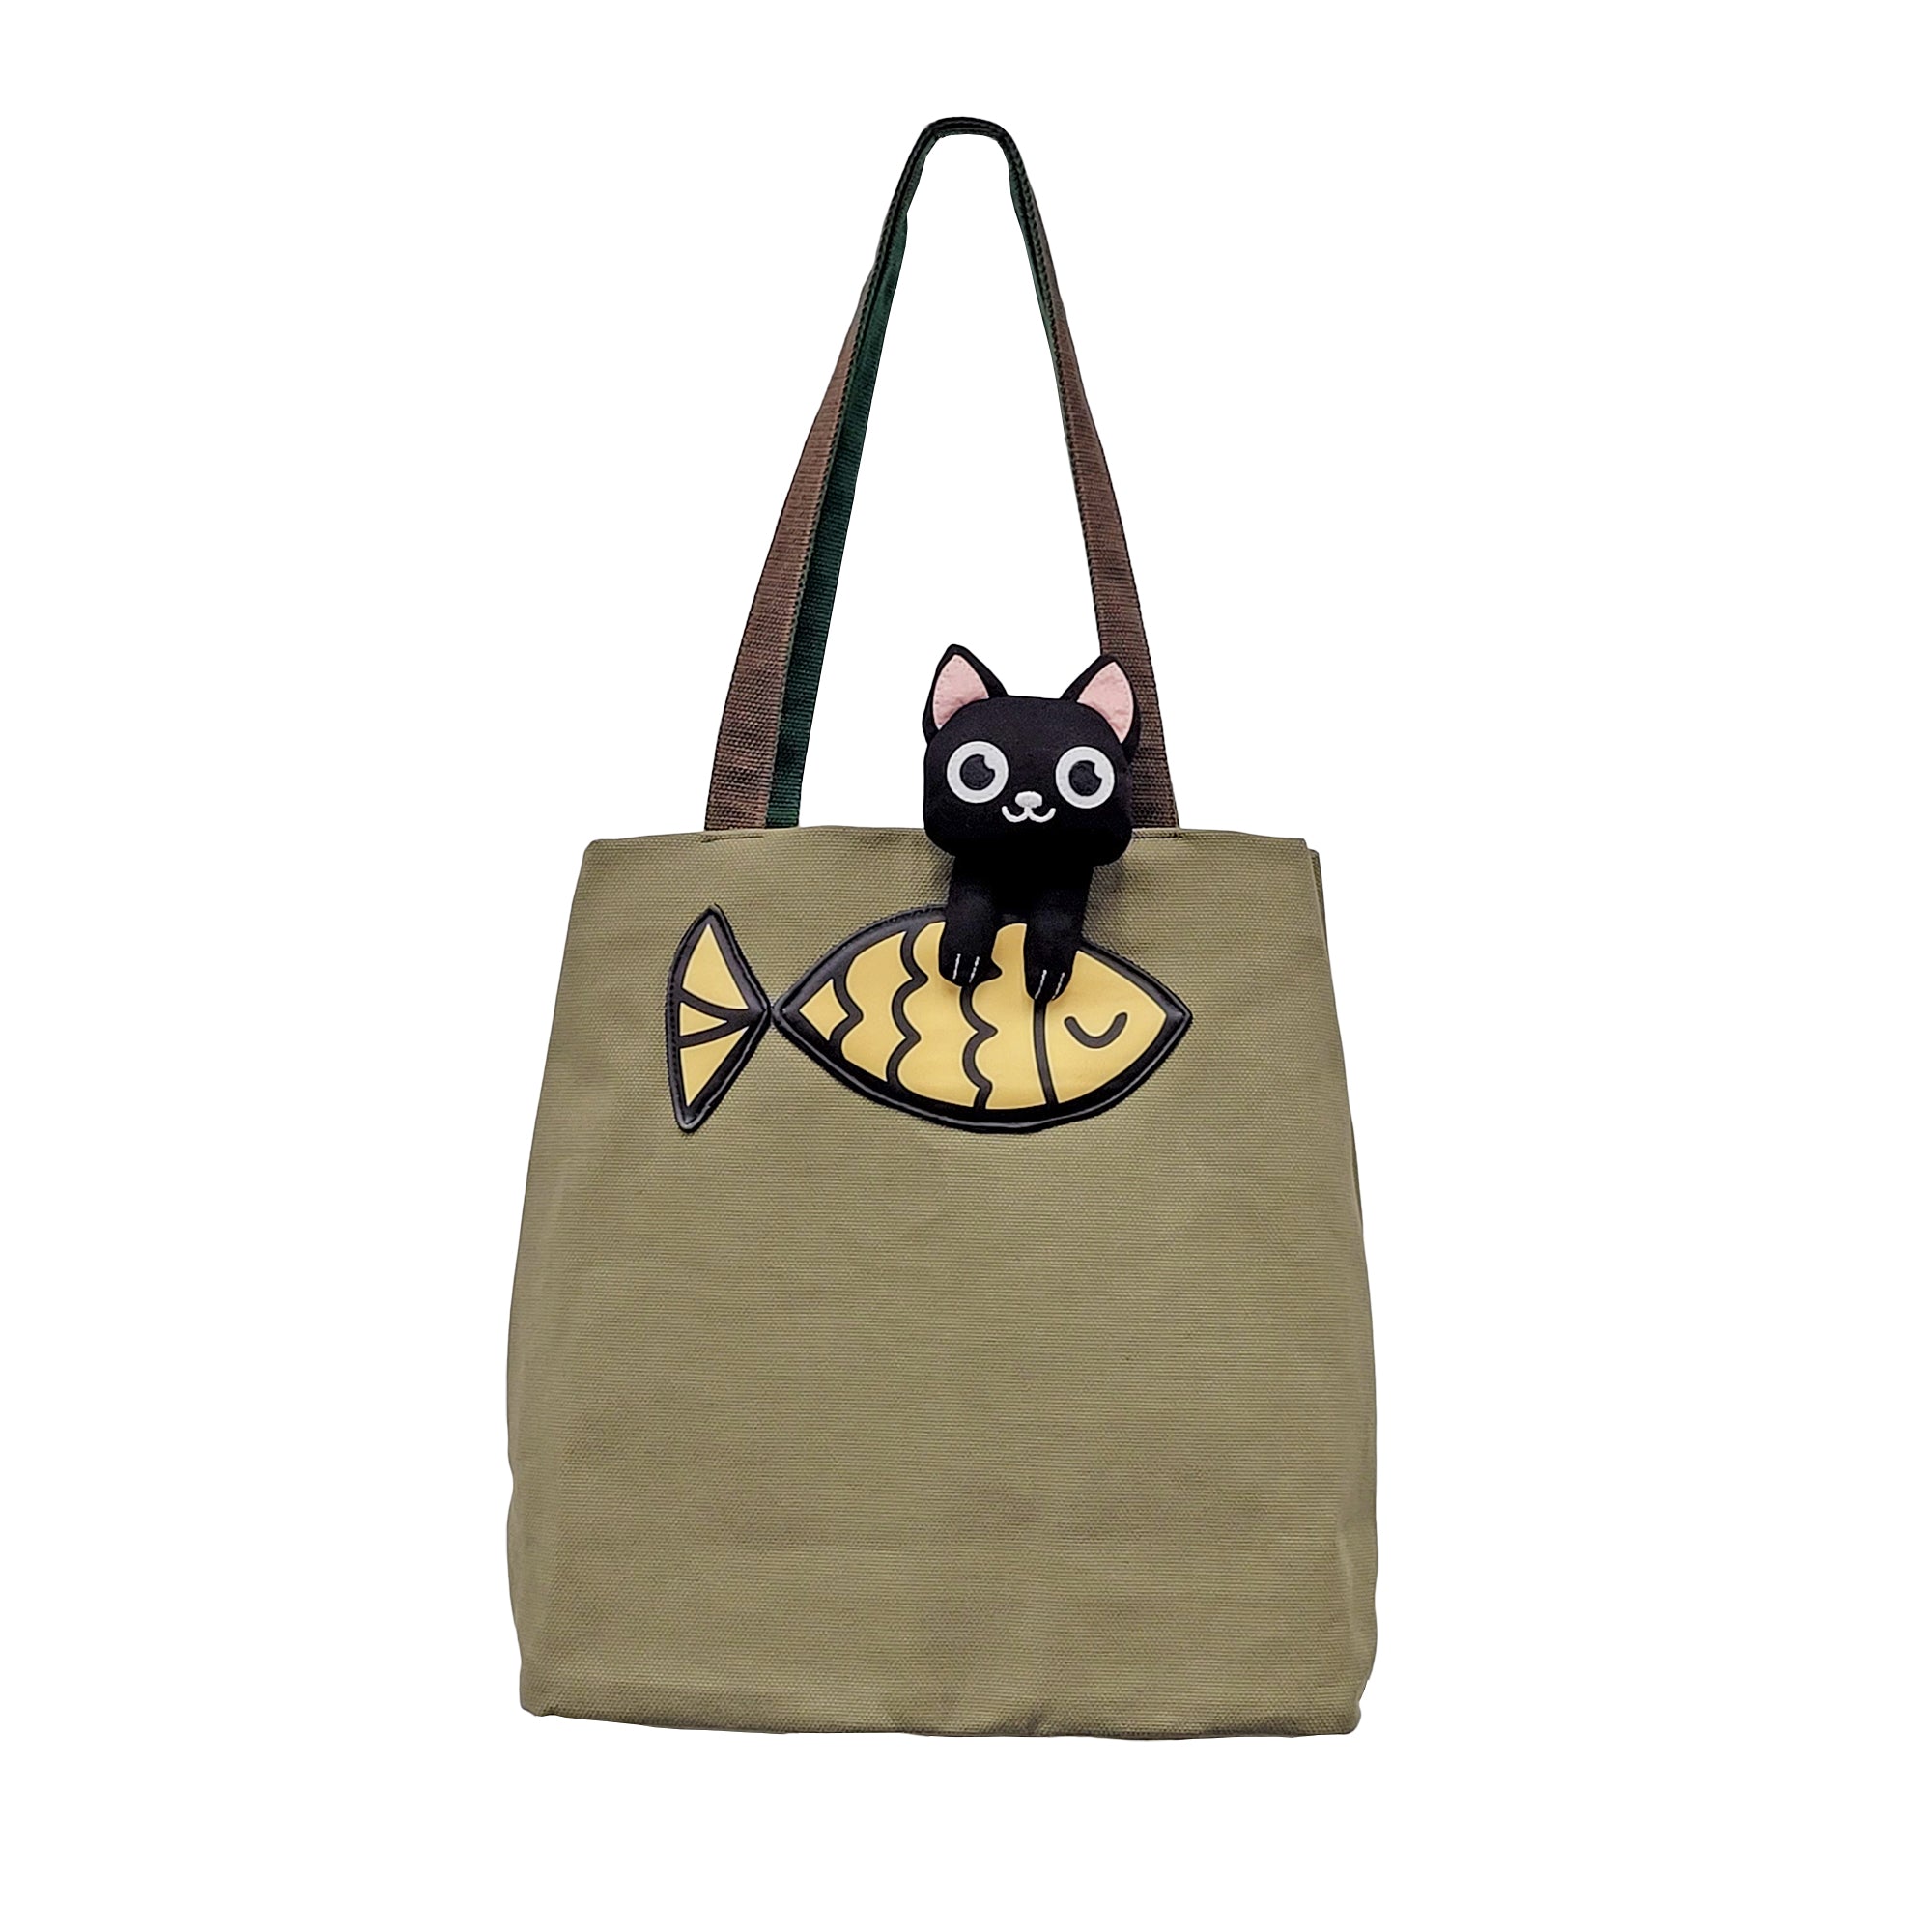 Cute Black Cat Tote Bag with Zipper Pouch-everyday bag-tote bag for women-weekender bag for women
